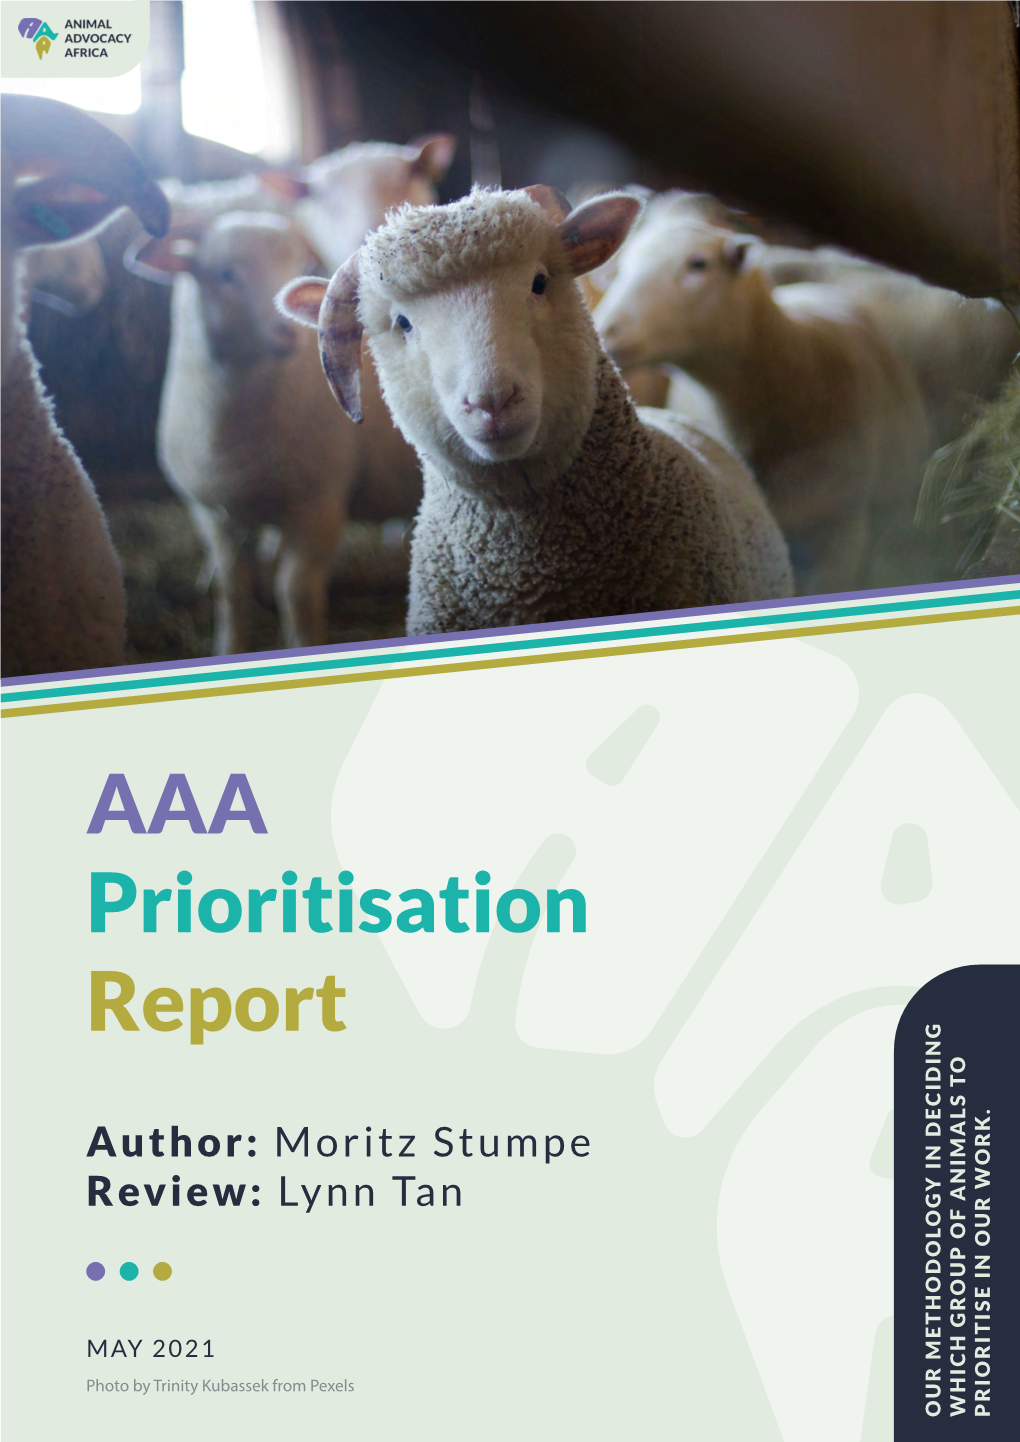 AAA Prioritisation Report ••• Primary Author: Moritz Stumpe Review: Lynn Tan